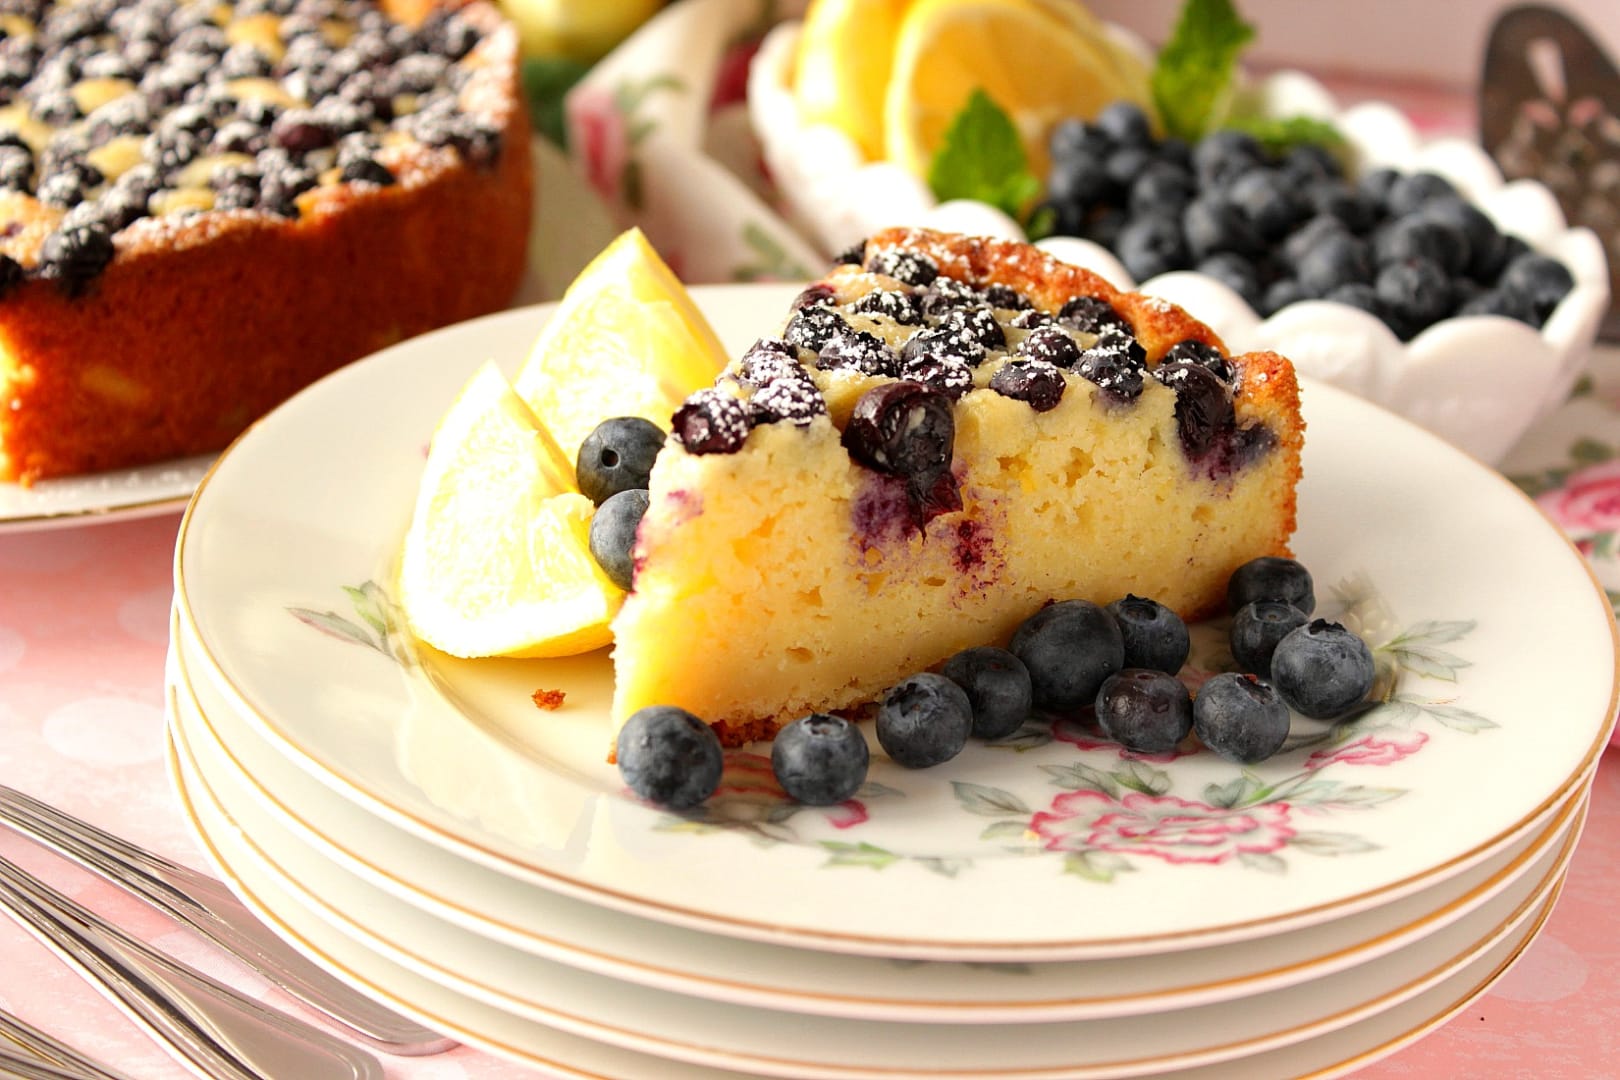 Fresh Blueberry Cake Mix Cake | What's Cookin' Italian Style Cuisine